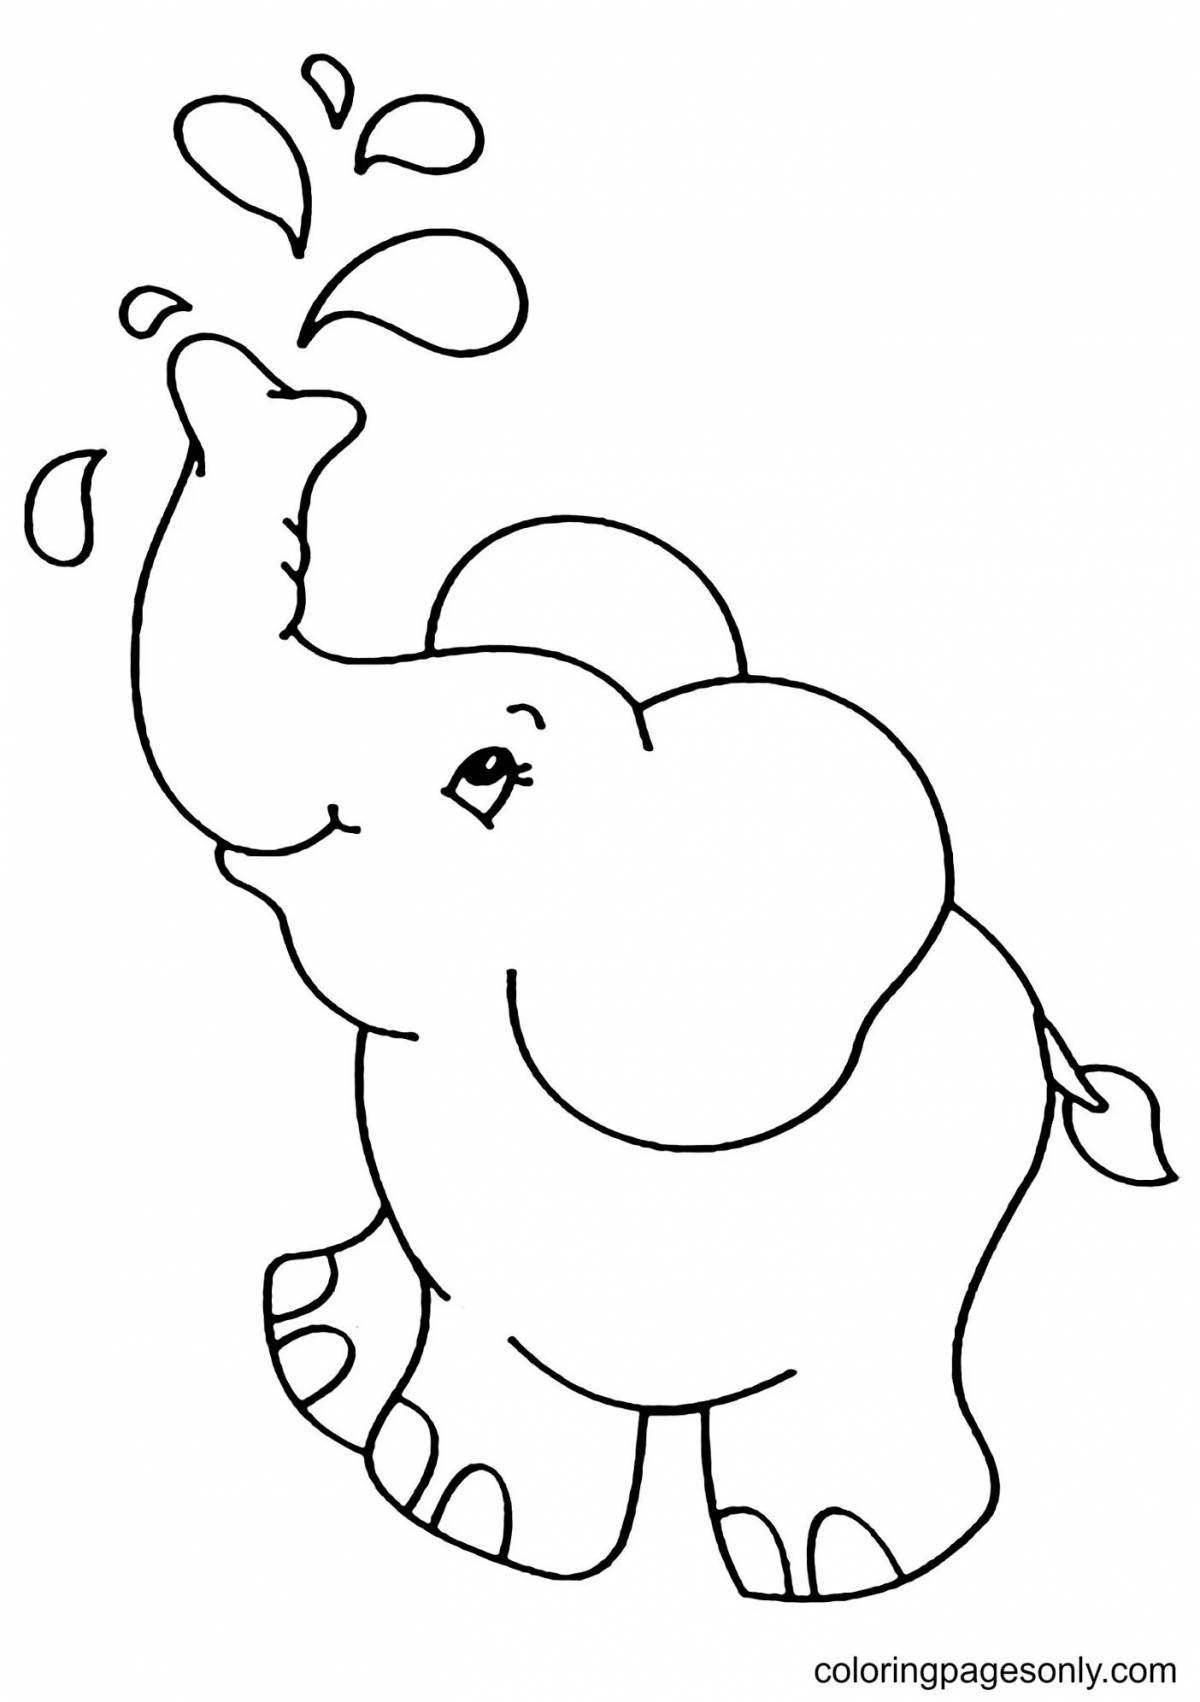 Glorious elephant coloring pages for kids